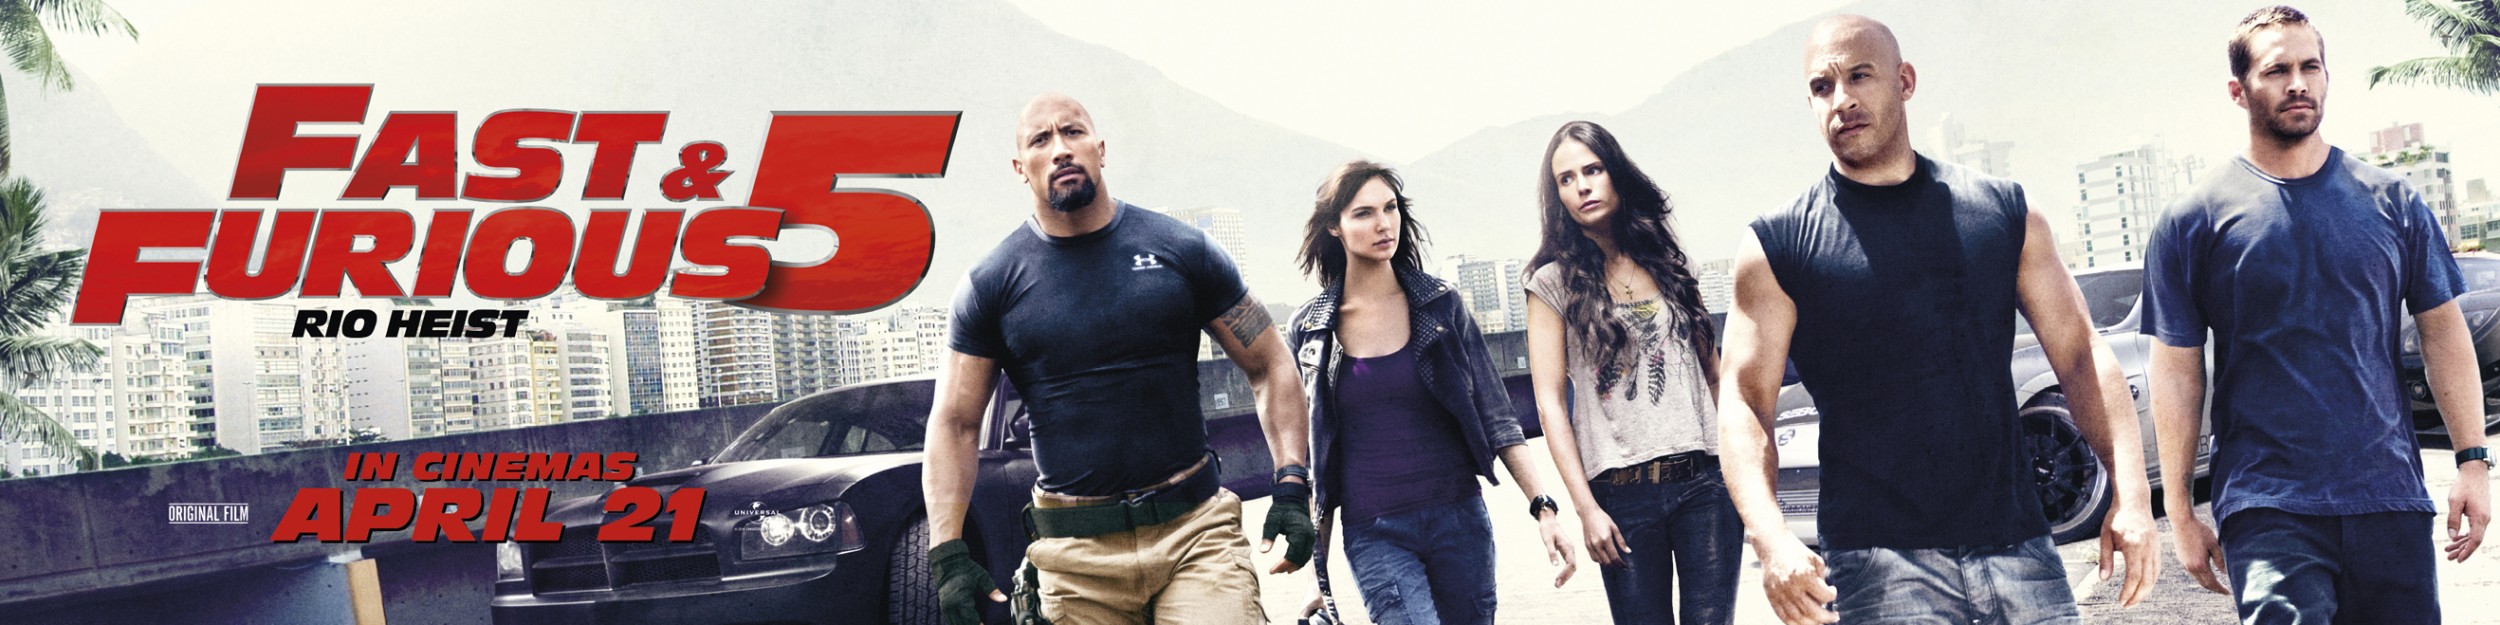 Mega Sized Movie Poster Image for Fast Five (#10 of 12)